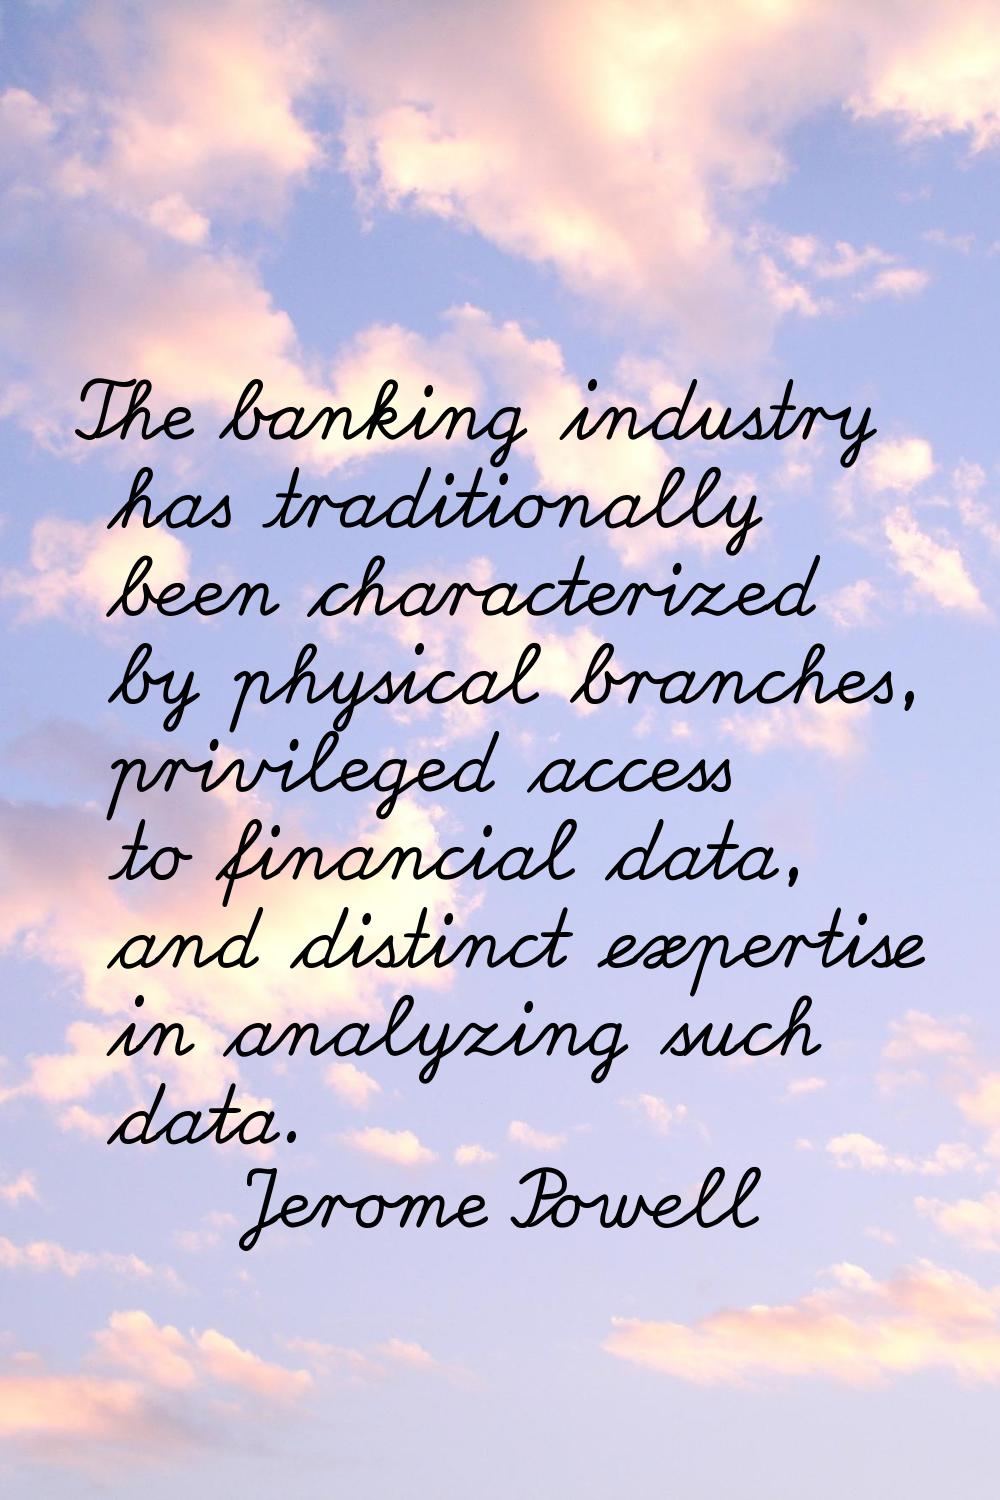 The banking industry has traditionally been characterized by physical branches, privileged access t